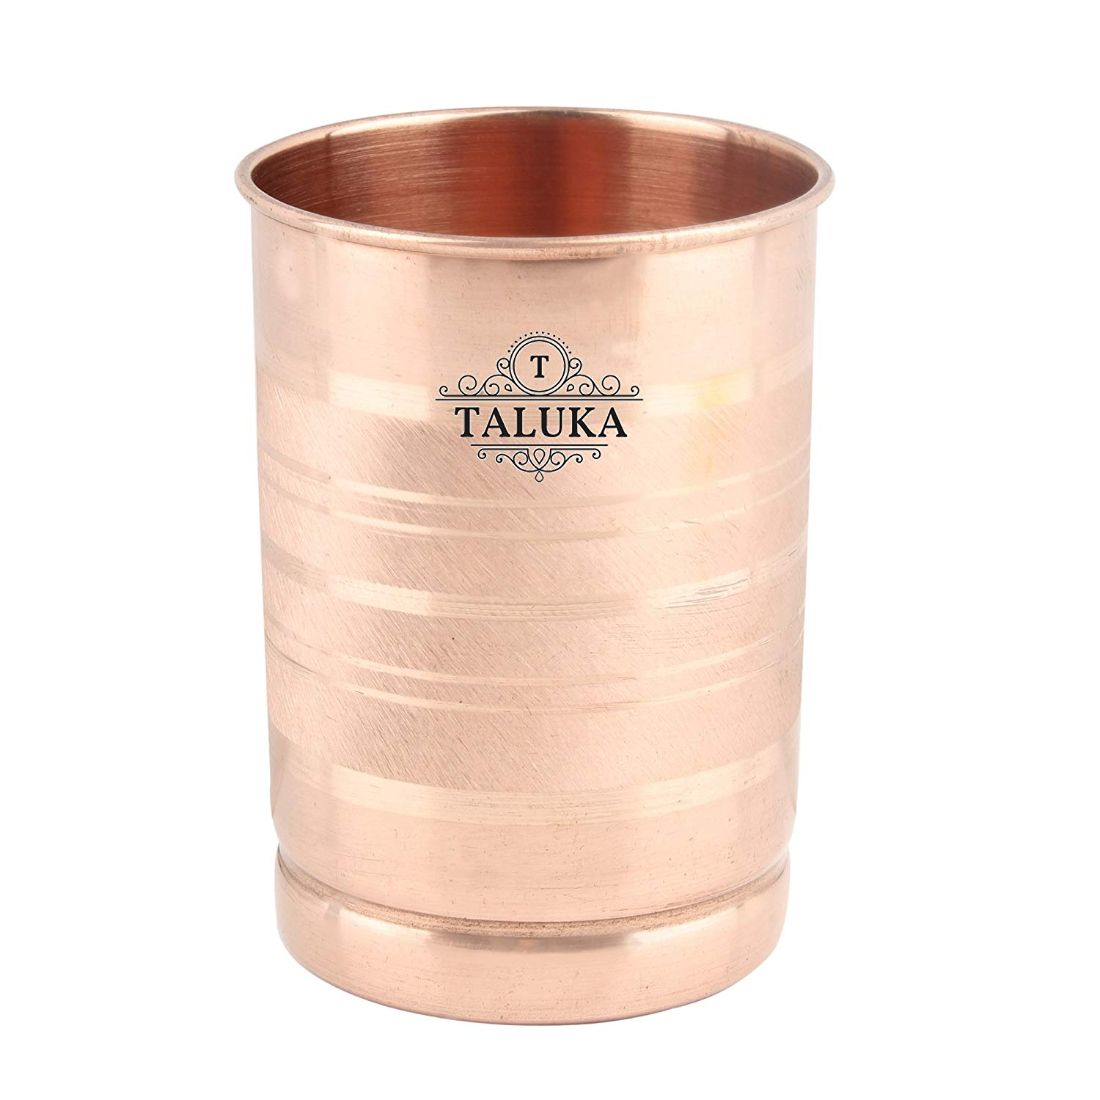 Copper Hammered Joint Free Water Bottle 1000 ML Set with 1 PC Glass Tumbler 300 ML-for Storage Drinkware